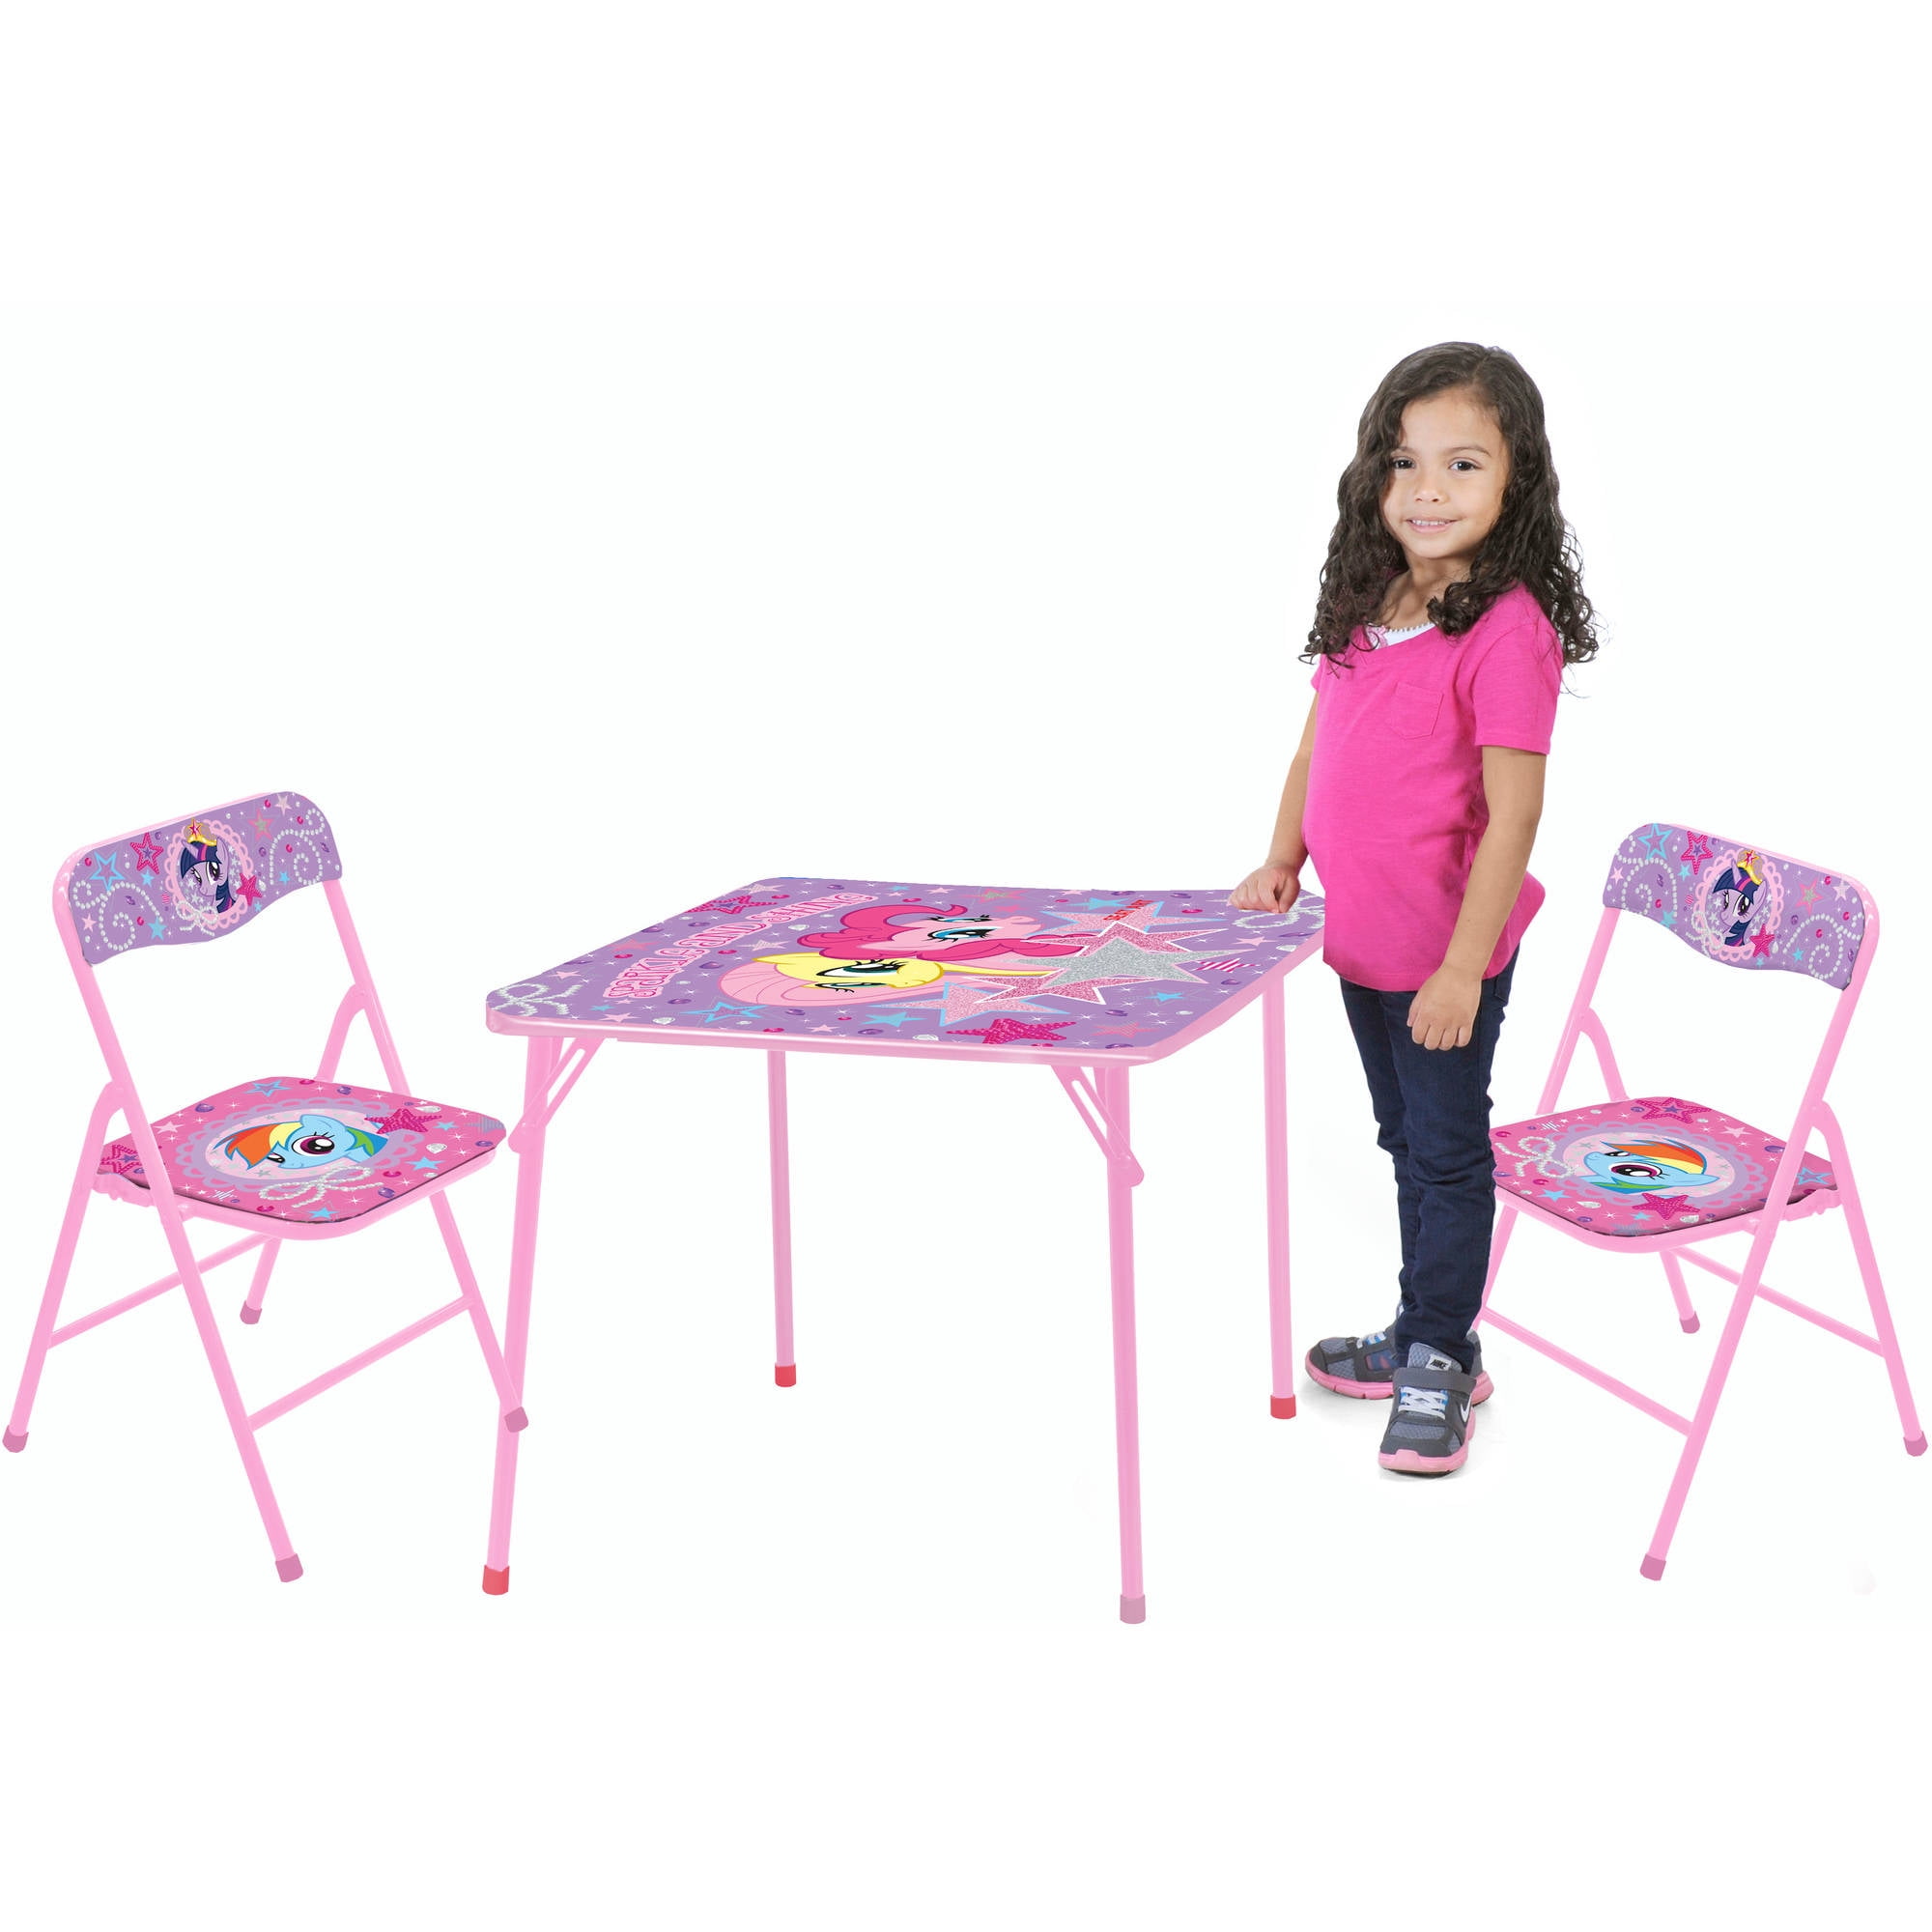 little kids table and chairs